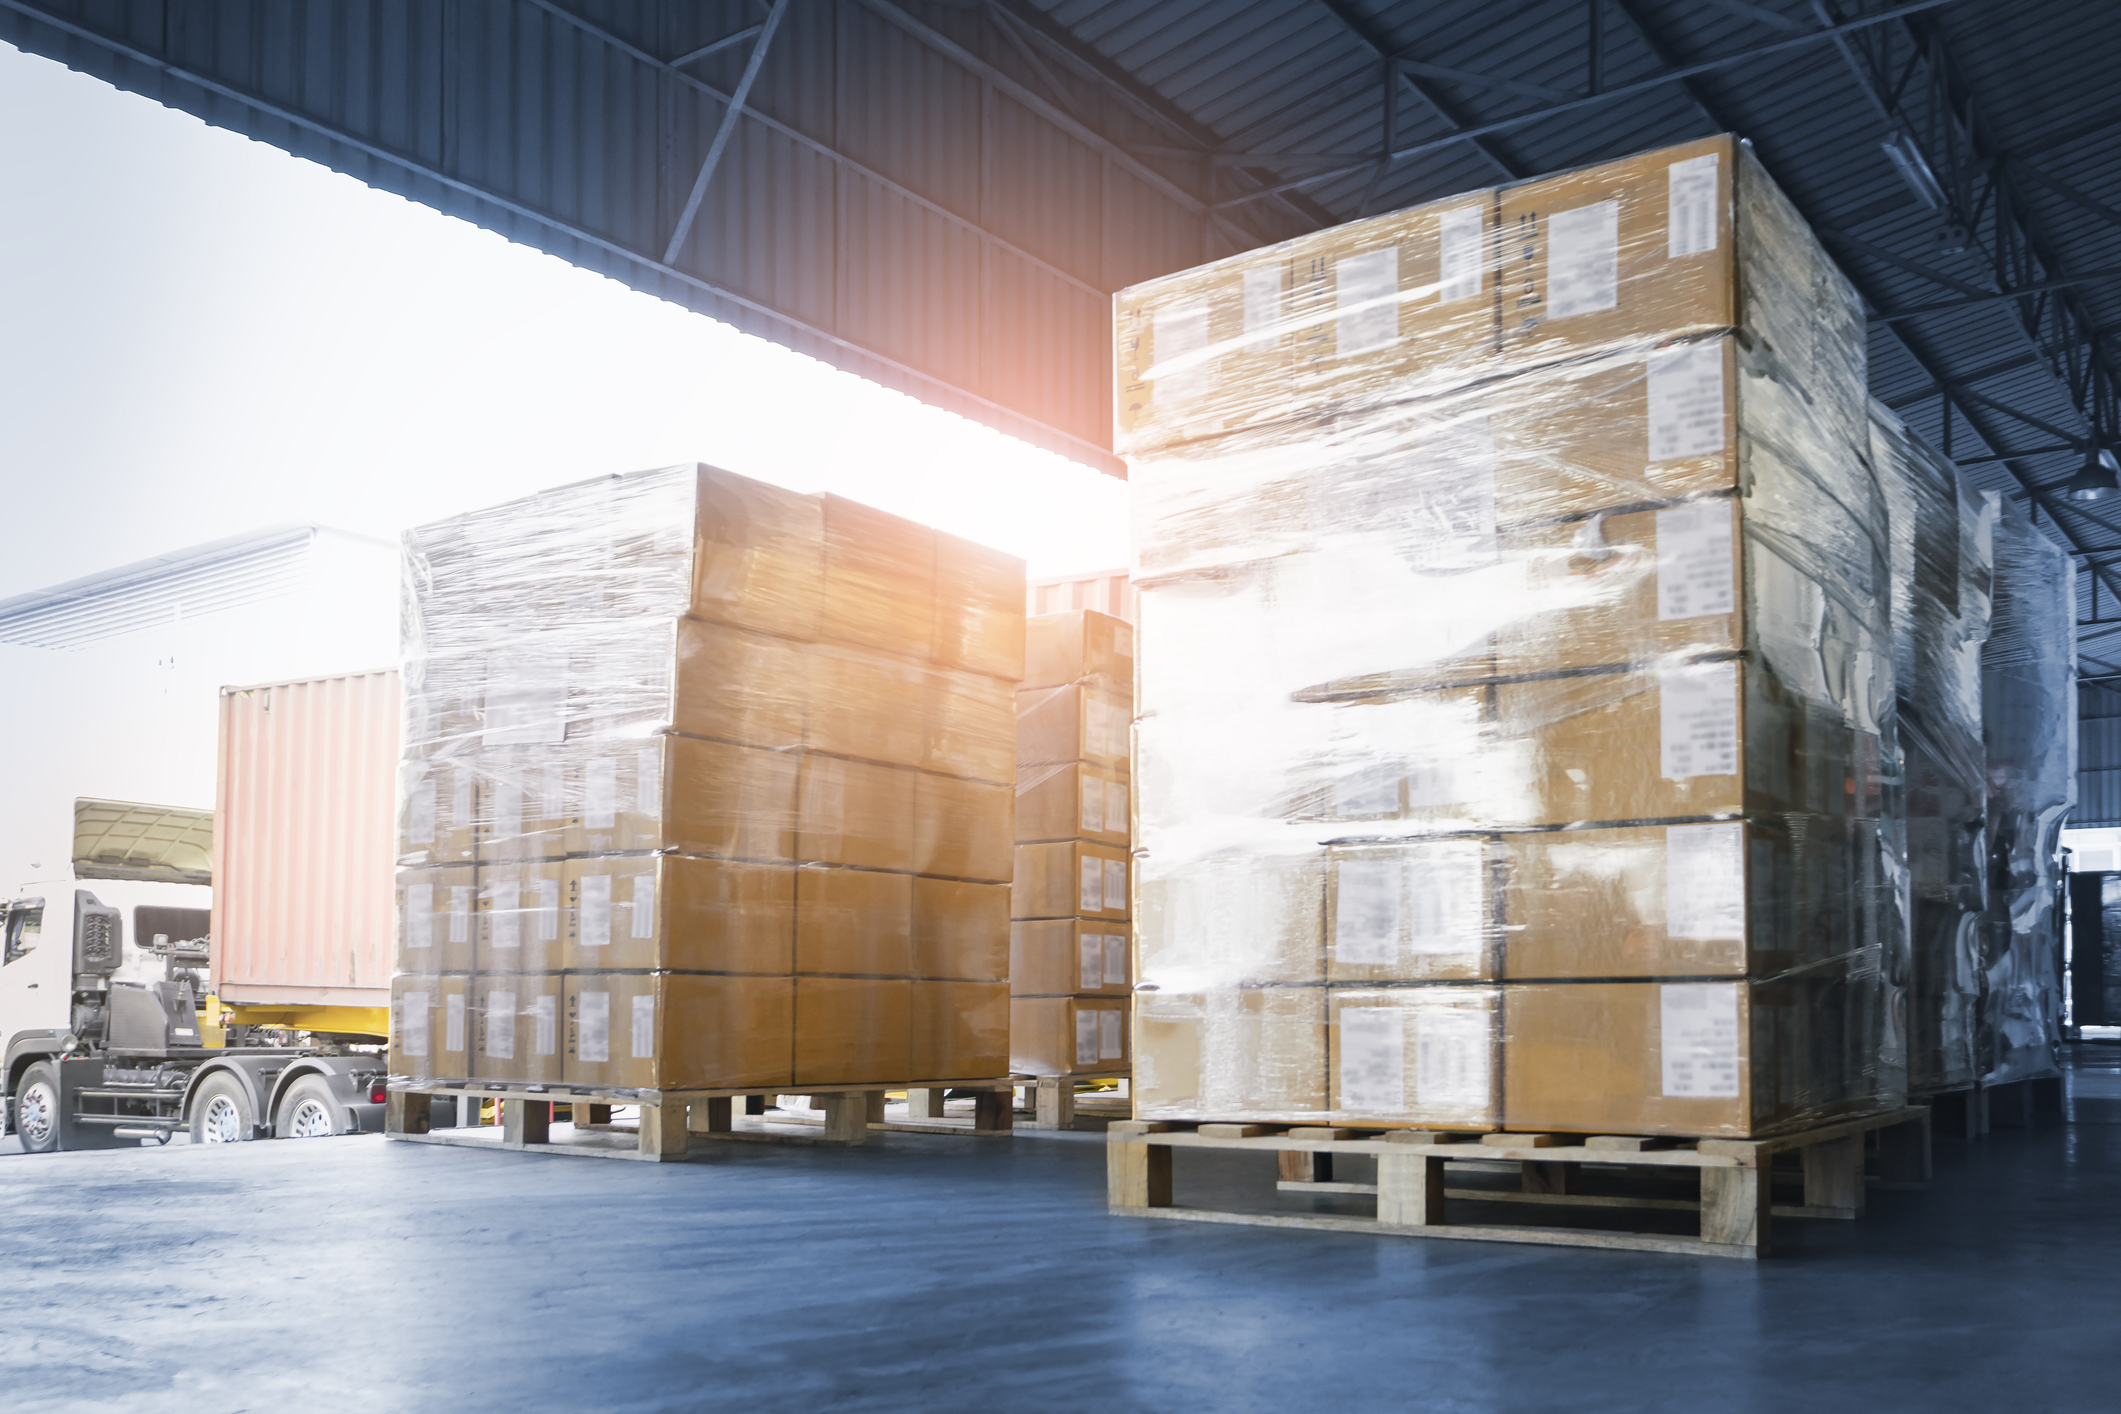 Stacked of Package Boxes Loading into Container Truck. Truck Parked Loading at Dock Warehouse. Delivery Service. Shipping Warehouse Logistics. Shipment Freight Truck Transportation. stock photo